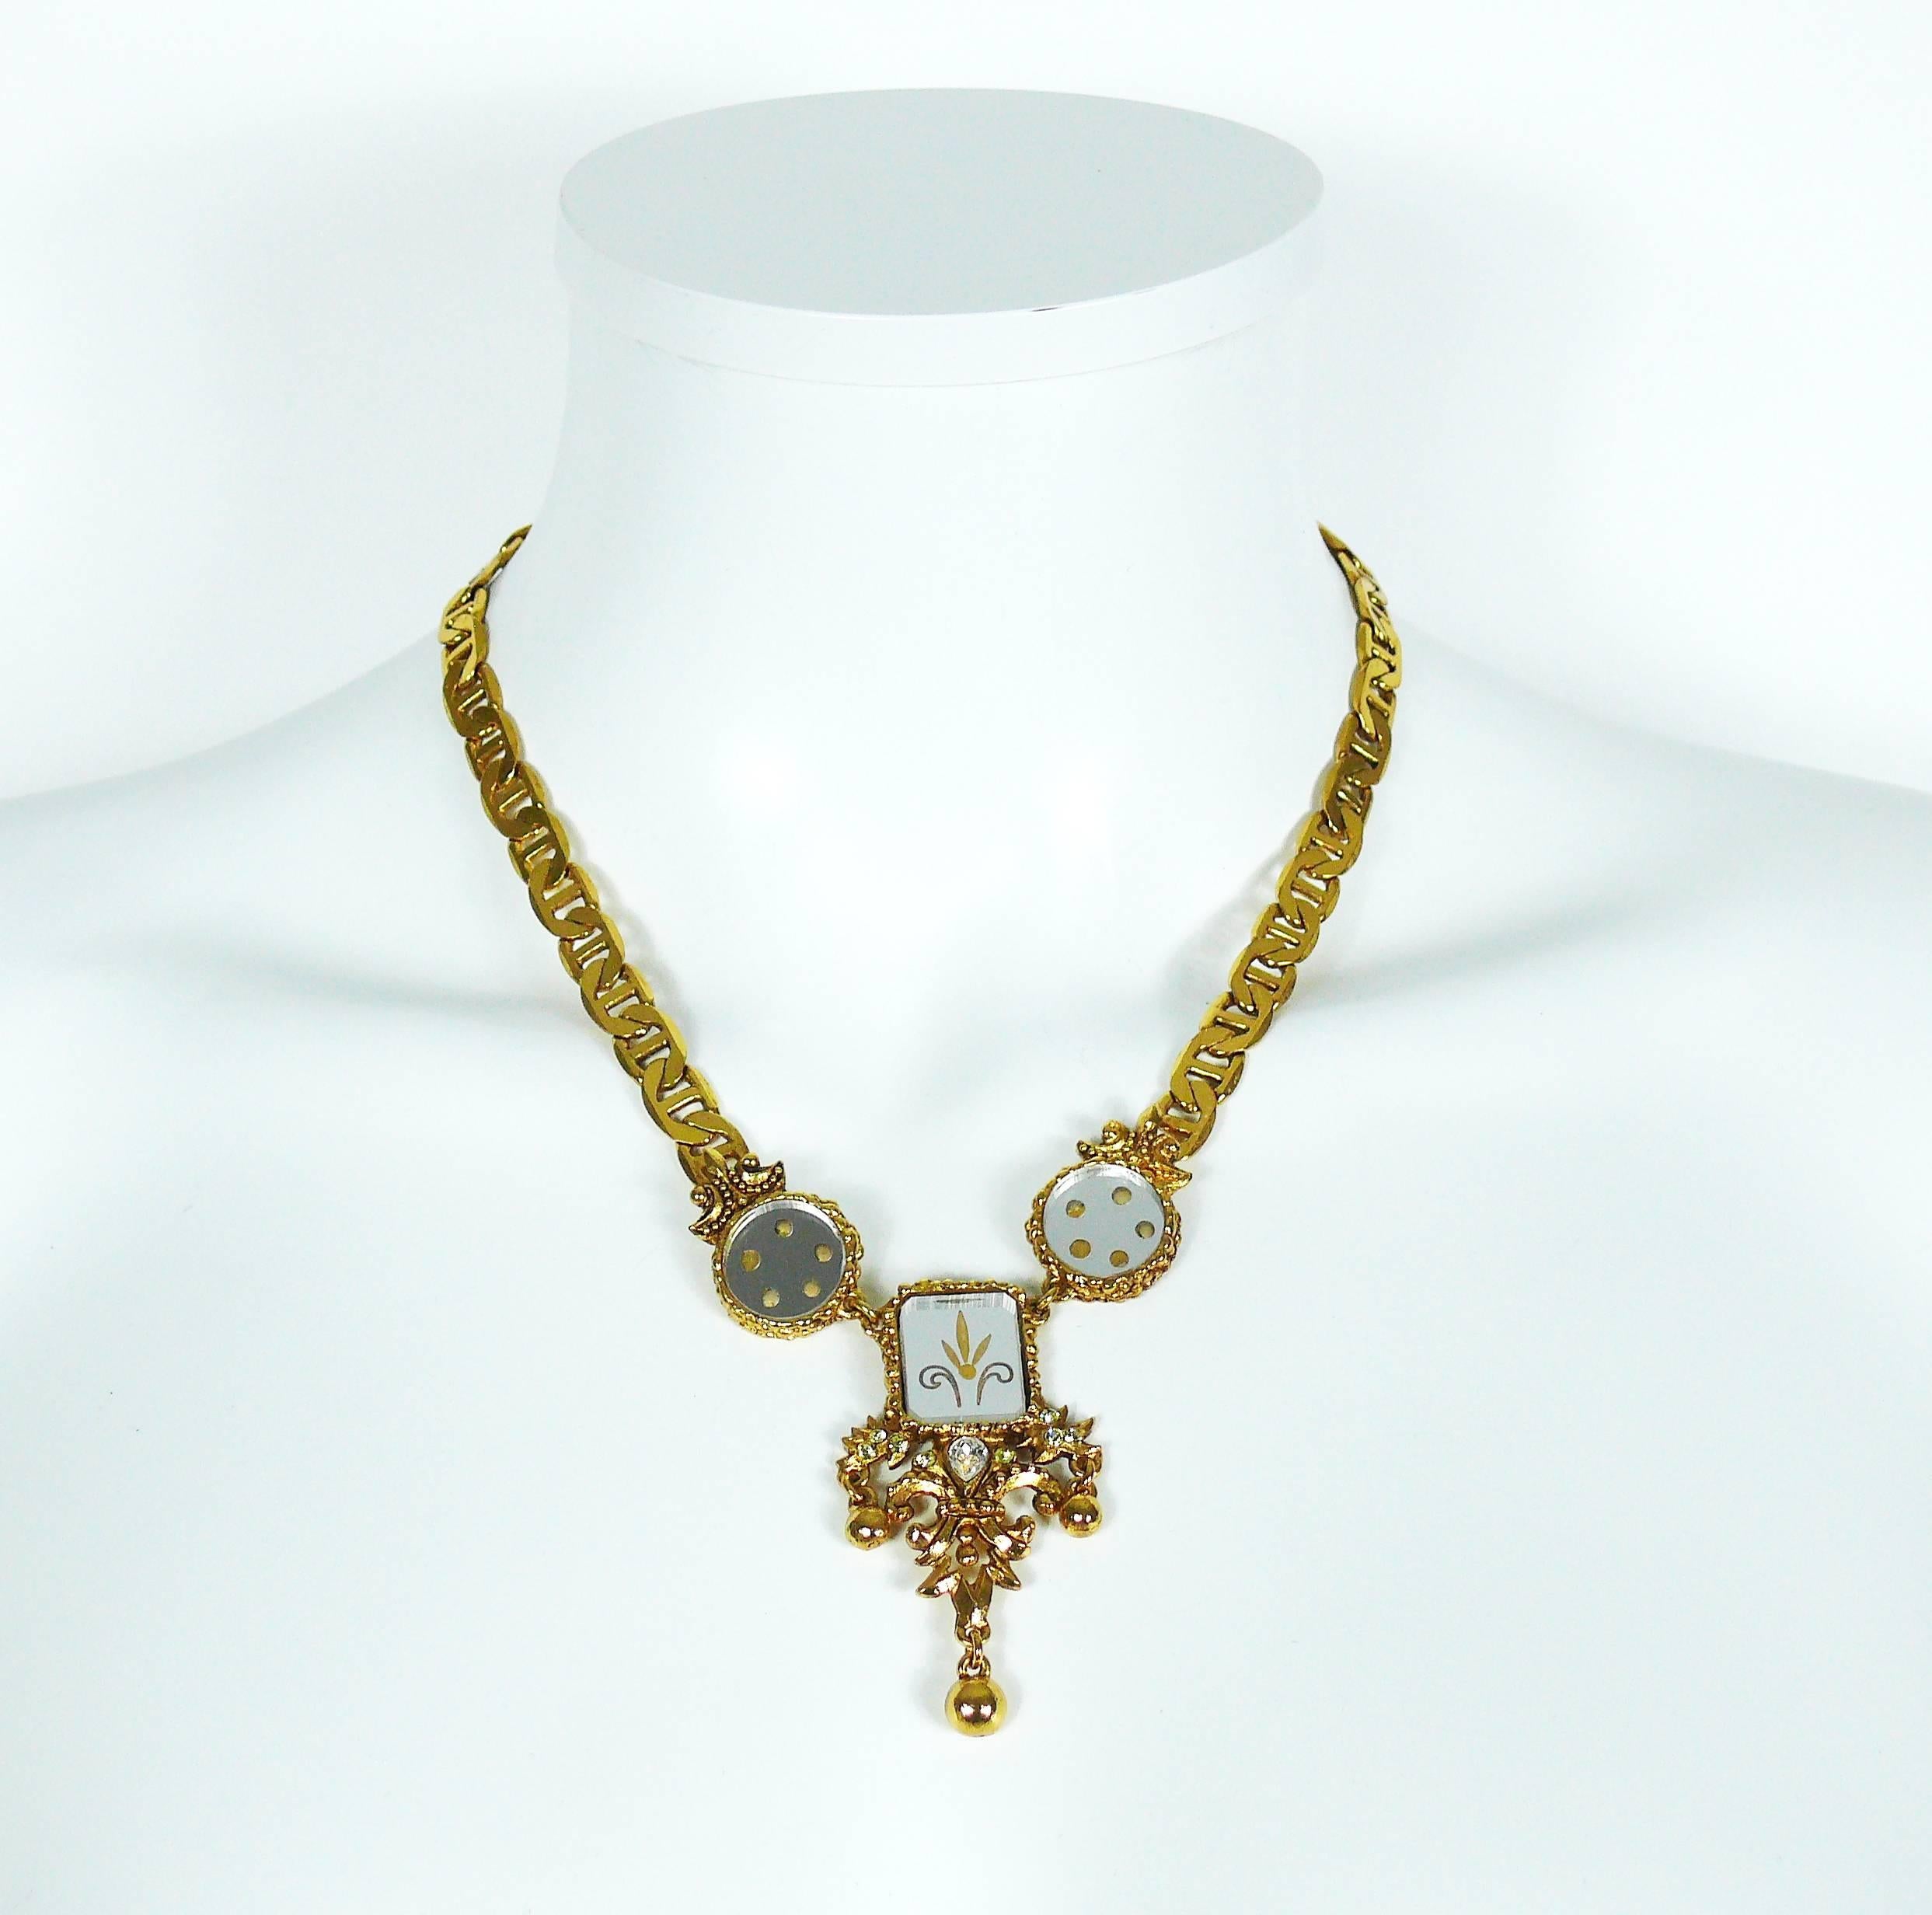 CHRISTIAN LACROIX vintage gold toned Baroque necklace featuring Venitian eglomise mirrors and crystal embellishement.

Hook clasp.
Extension chain.

Marked CHRISTIAN LACROIX CL Made in France.

Indicative measurements : total length approx. 49 cm